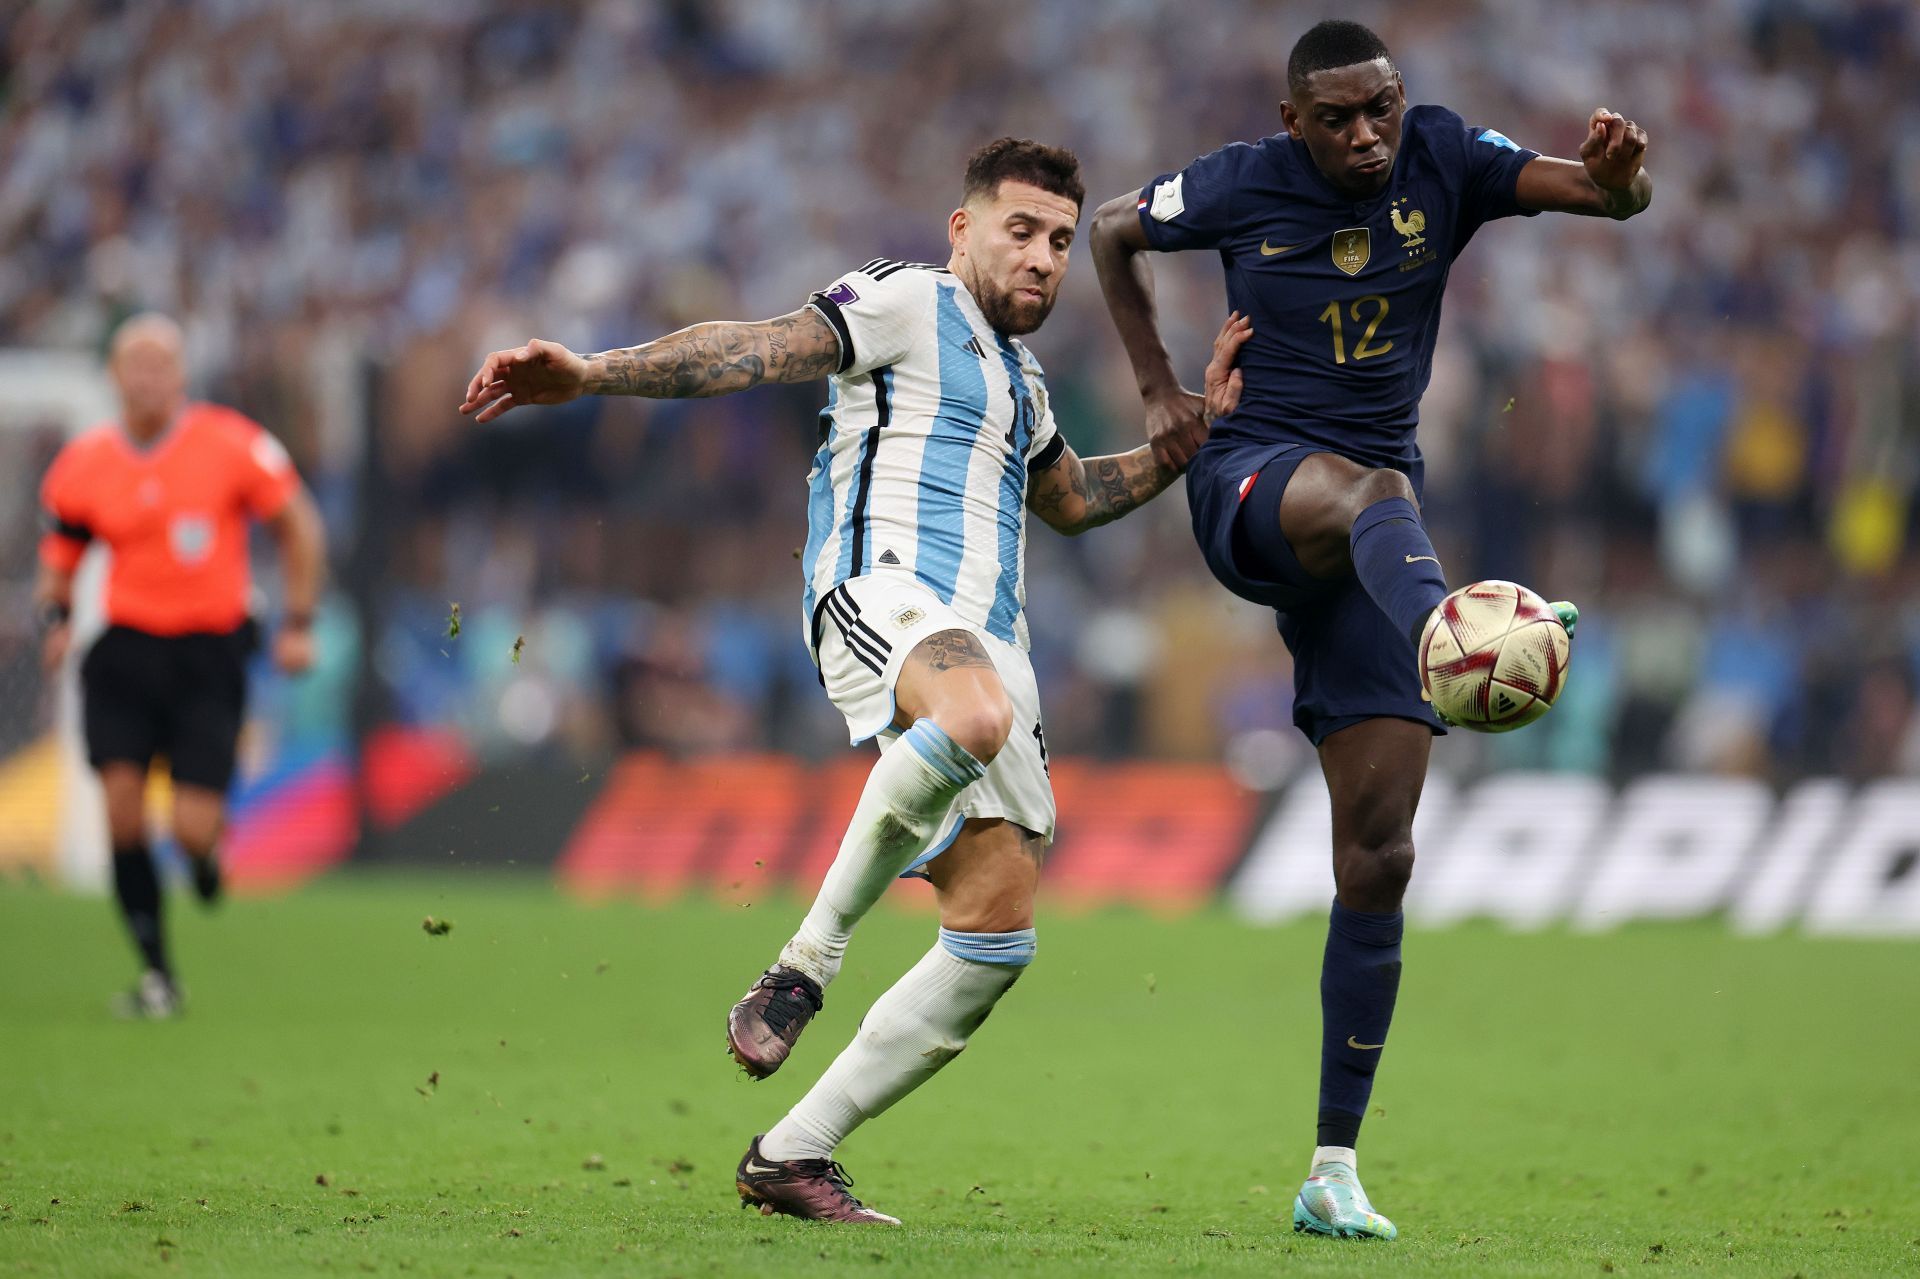 Randal Kolo Muani in action for France against Argentina in the 2022 World Cup Finals